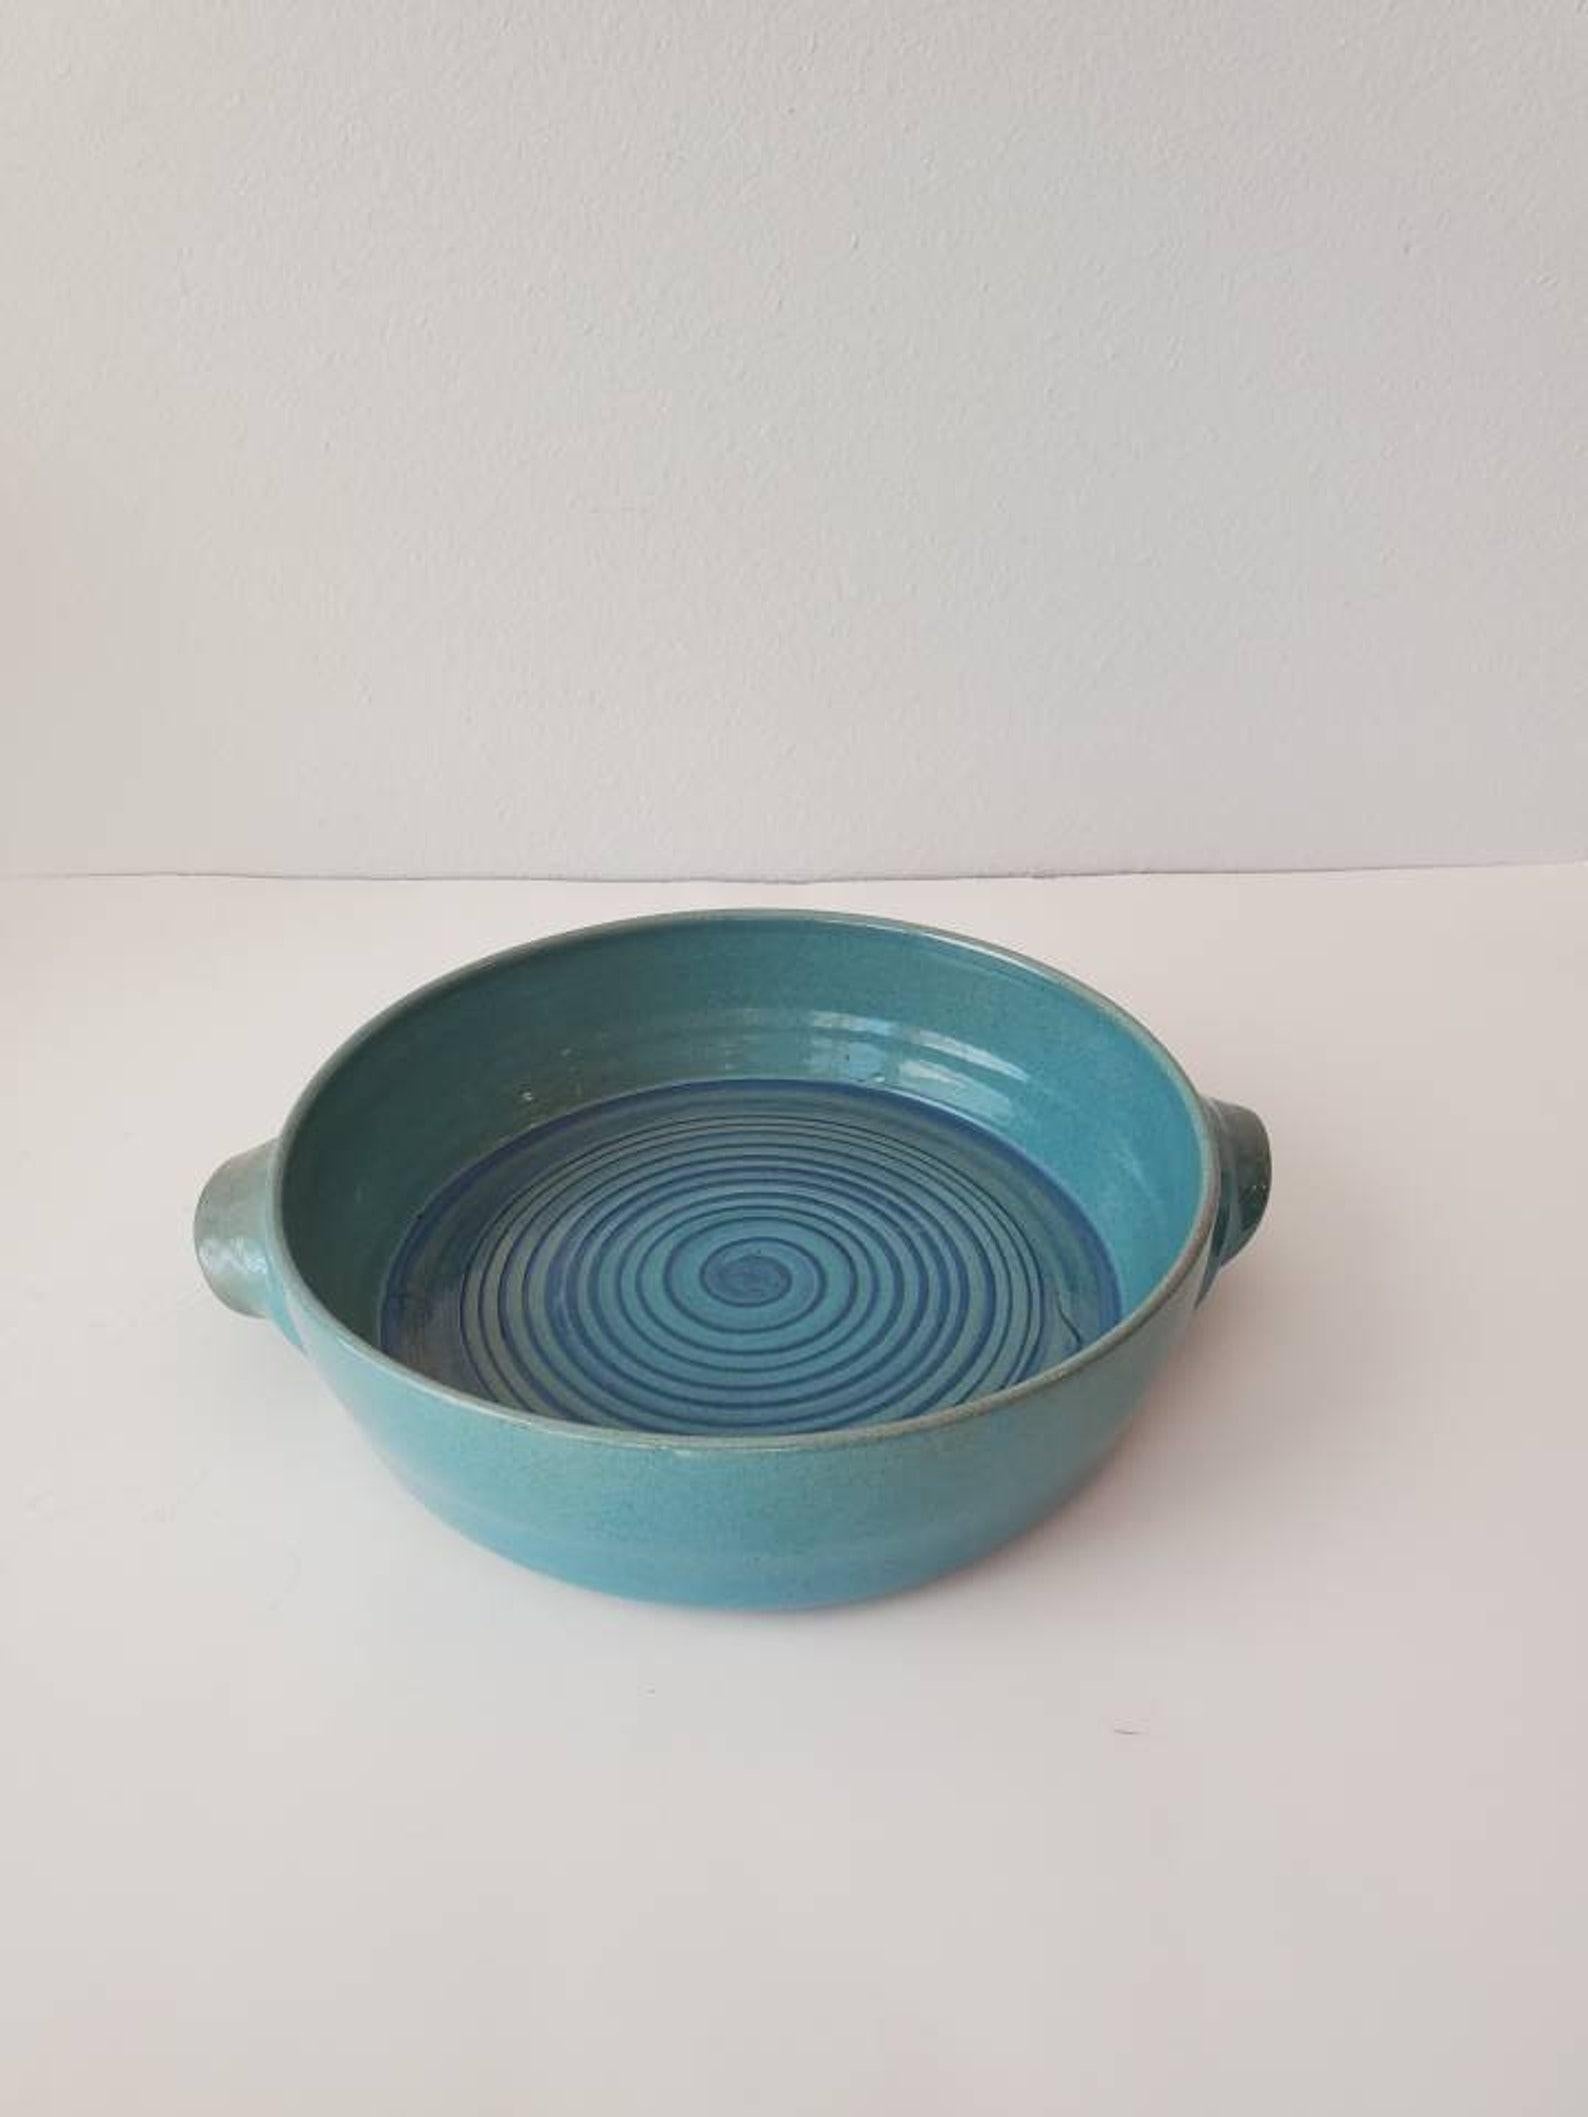 Early and rare hand-thrown ceramic serving dish by mid-century modern masters, Edwin and Mary Scheier. With curved handles and a swirl design, this fabulous hand-crafted pottery stoneware features a circular three inch deep bowl basin, with two